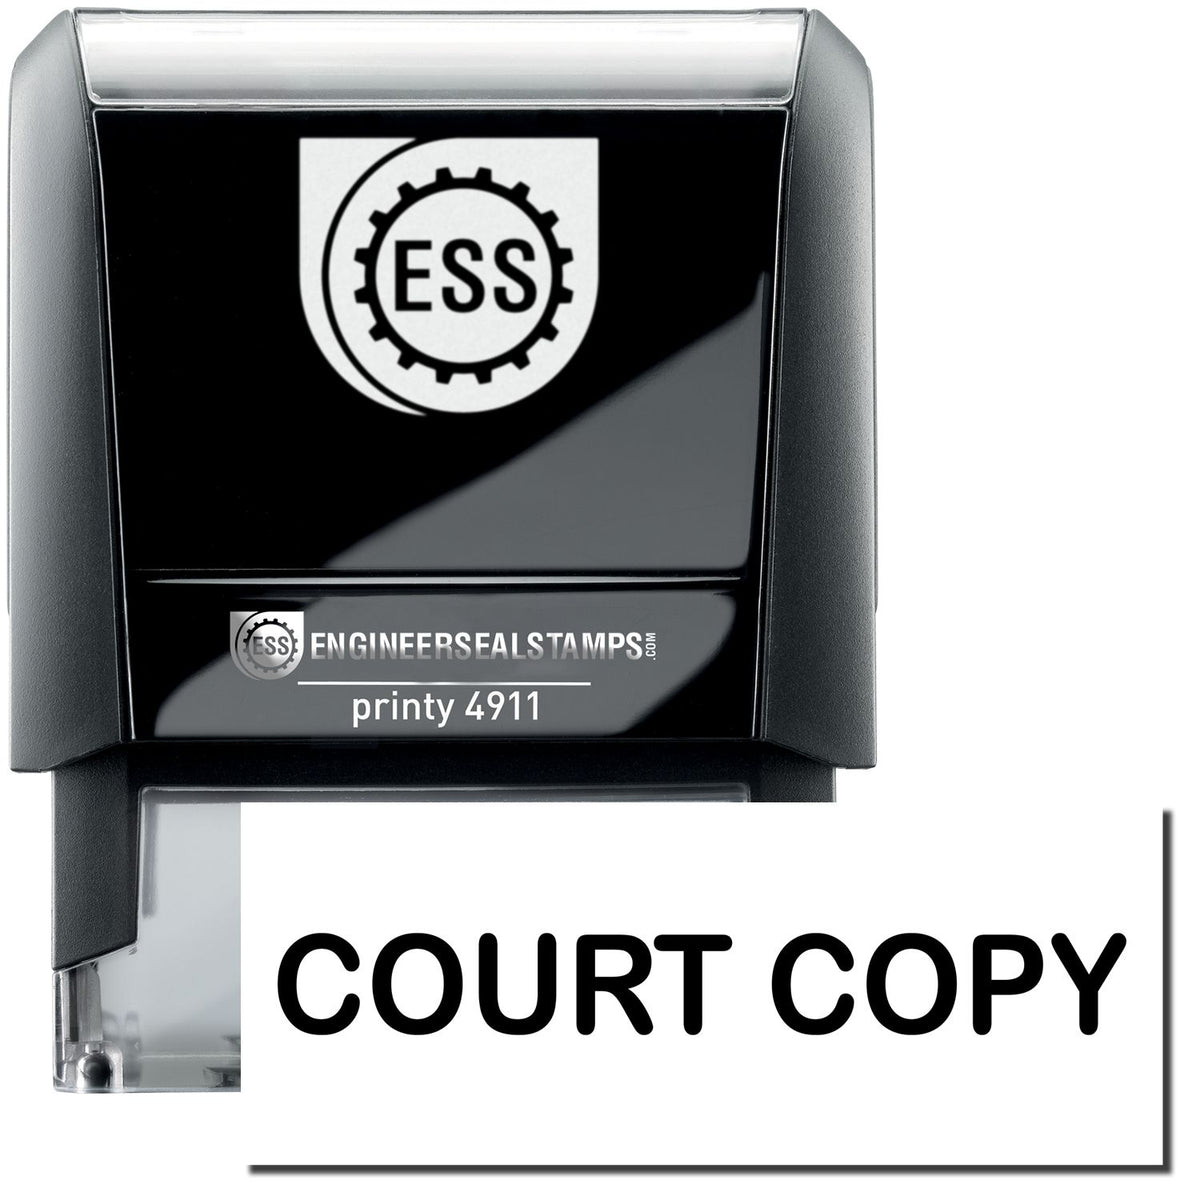 A self-inking stamp with a stamped image showing how the text &quot;COURT COPY&quot; is displayed after stamping.